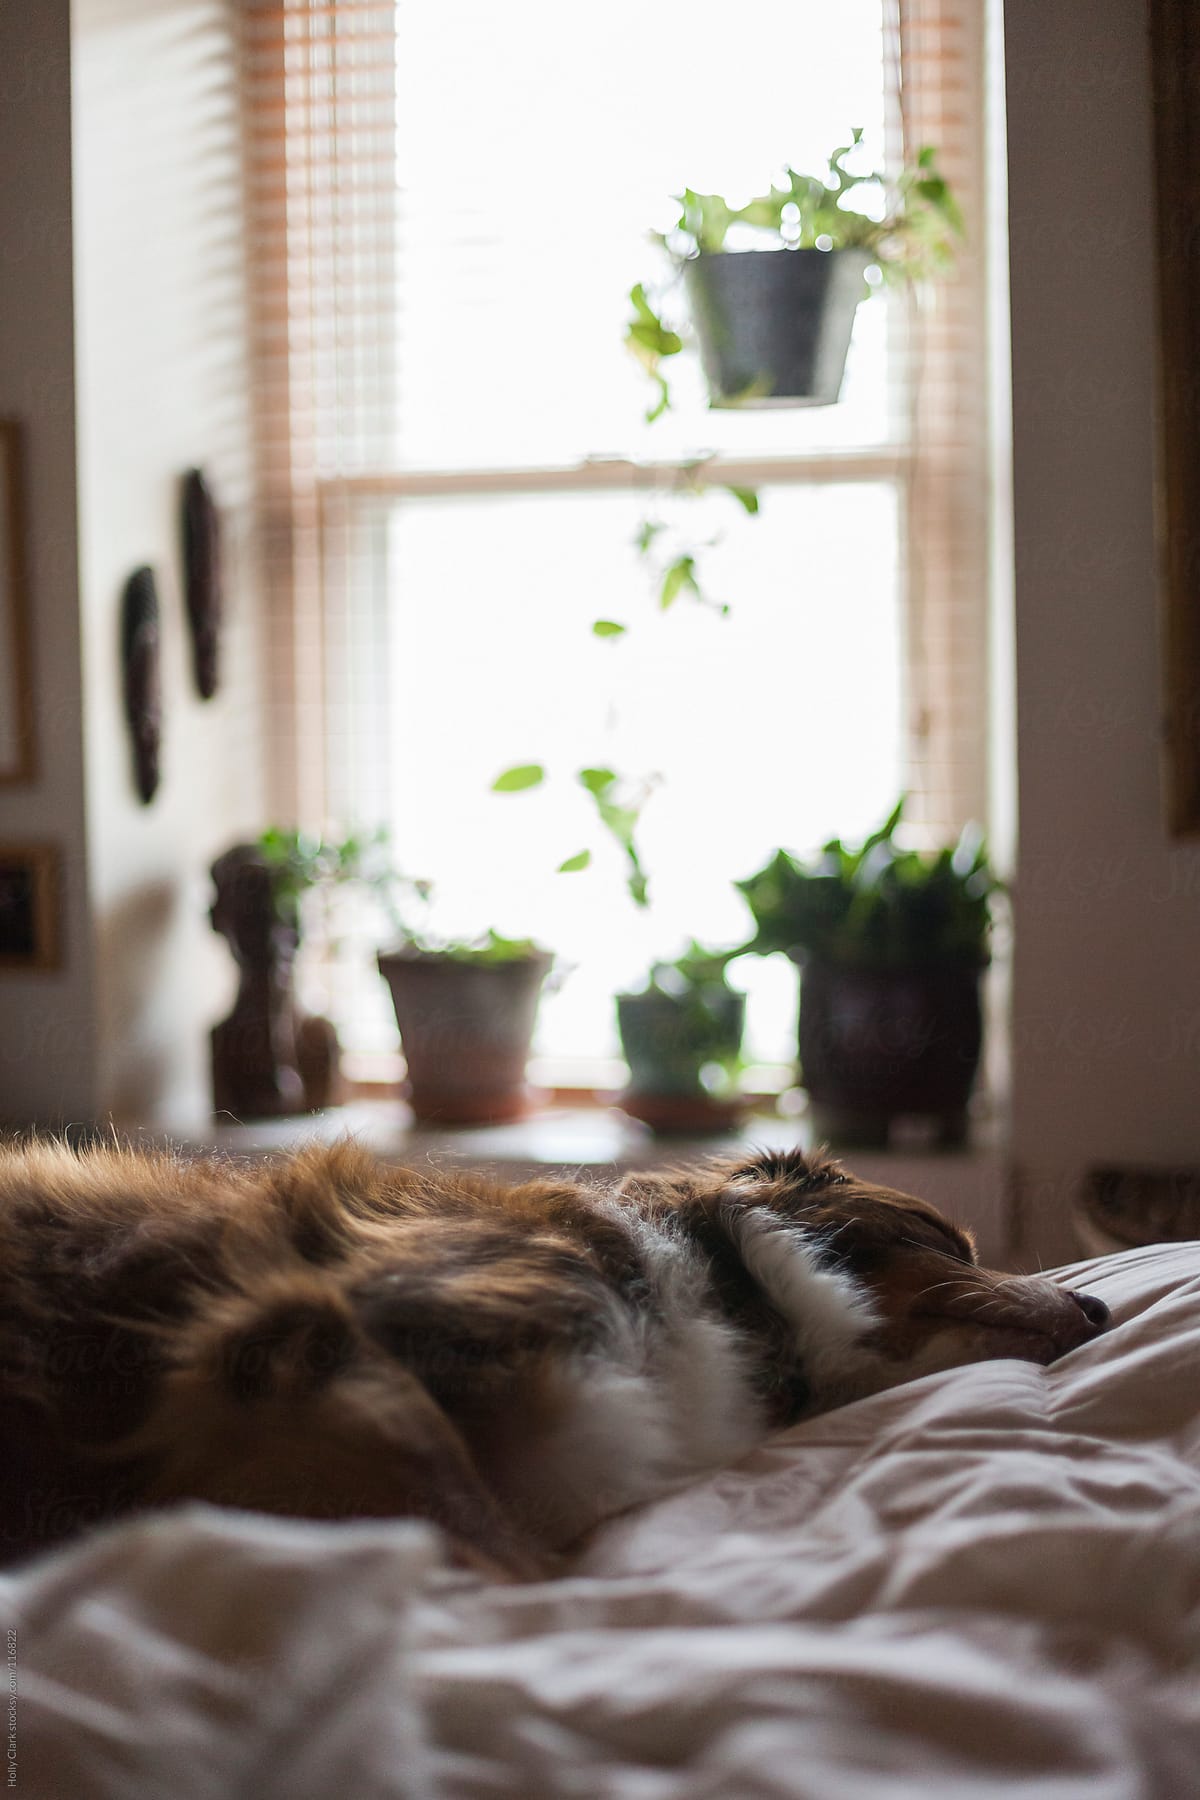 Dog asleep on bed in front of a window with houseplants